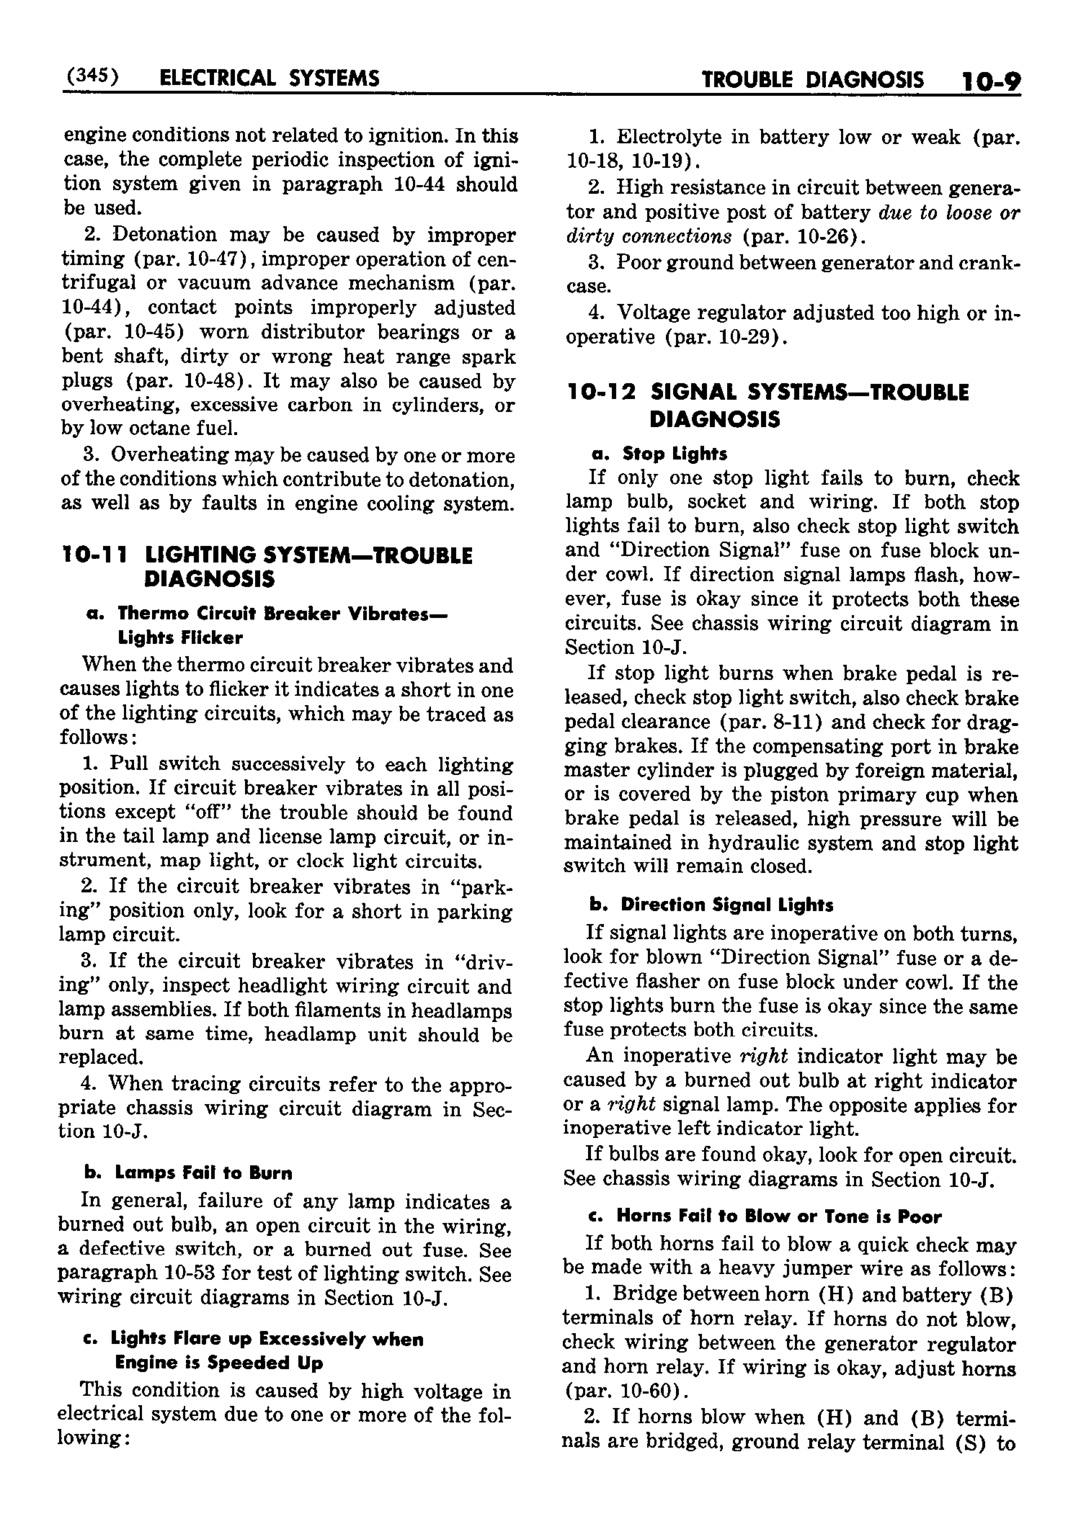 n_11 1952 Buick Shop Manual - Electrical Systems-009-009.jpg